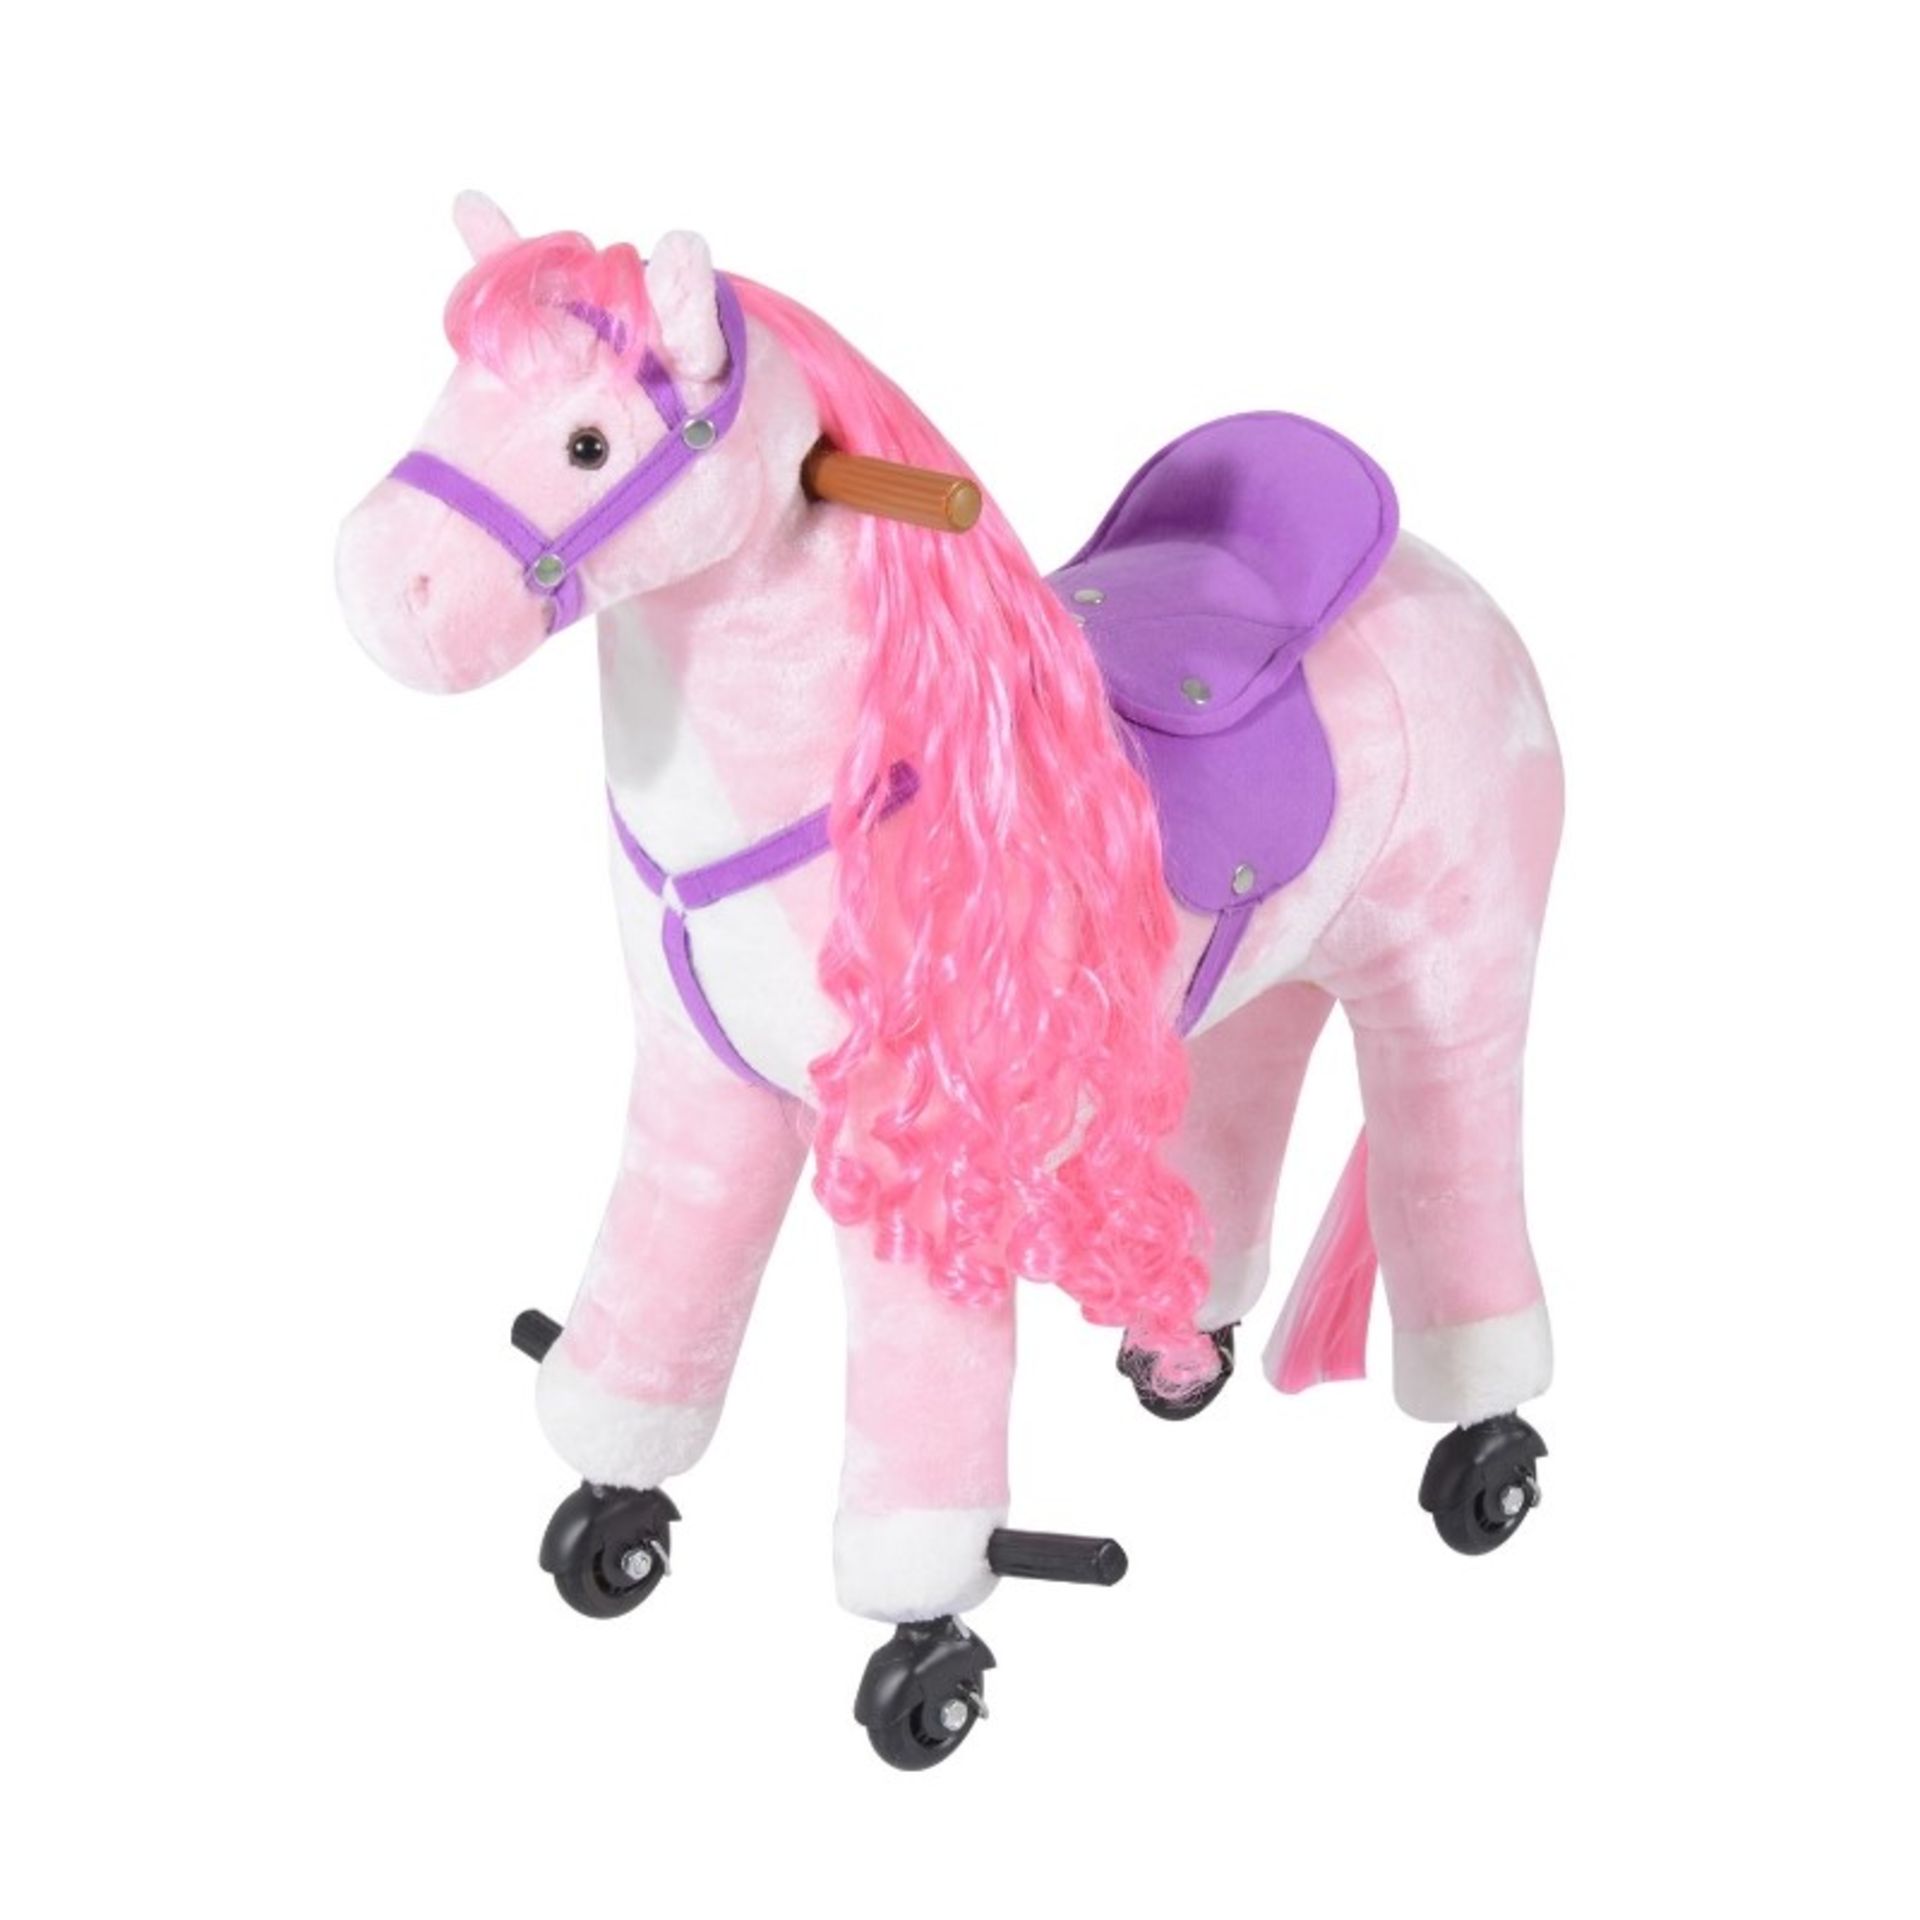 RRP £89.99 - Kids Plush Ride On Walking Horse W/Sound-Pink - This quality toy is recommended for